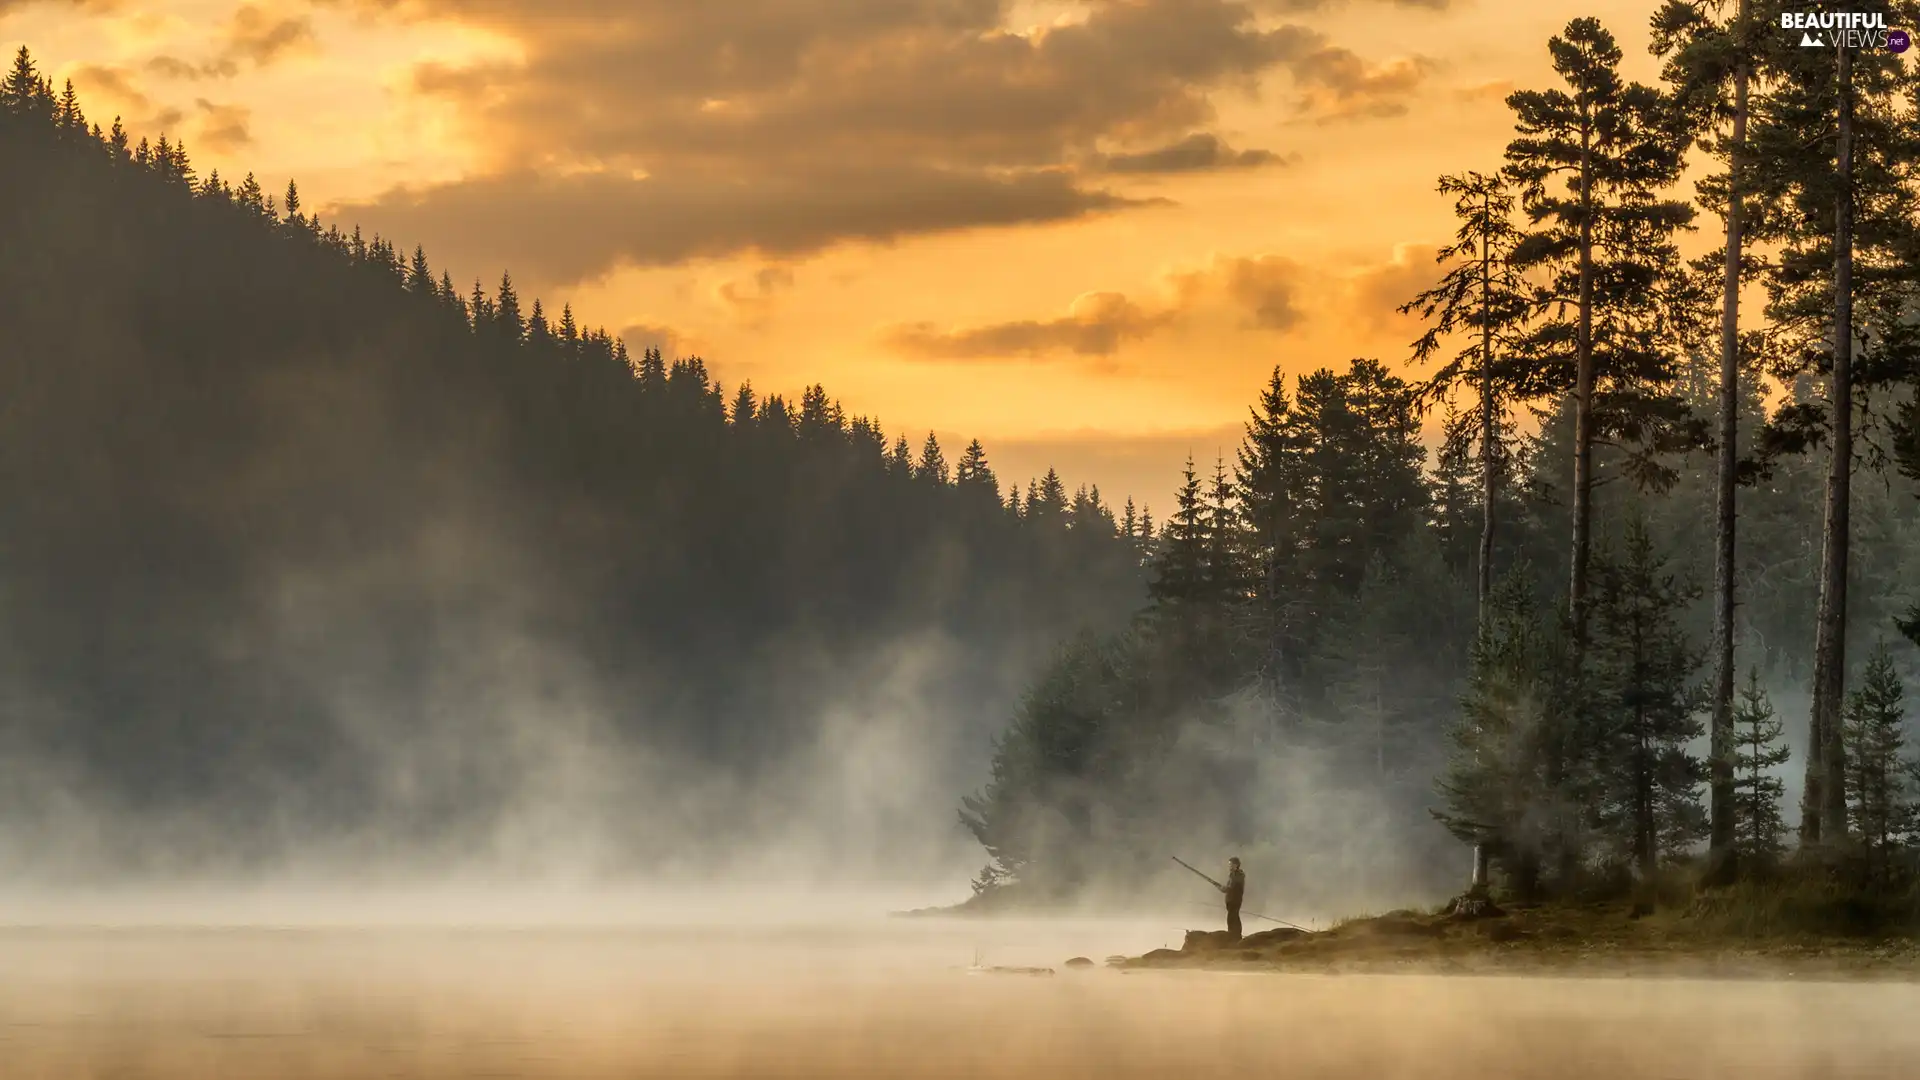 viewes, River, Human, trees, forest, Fog, angler